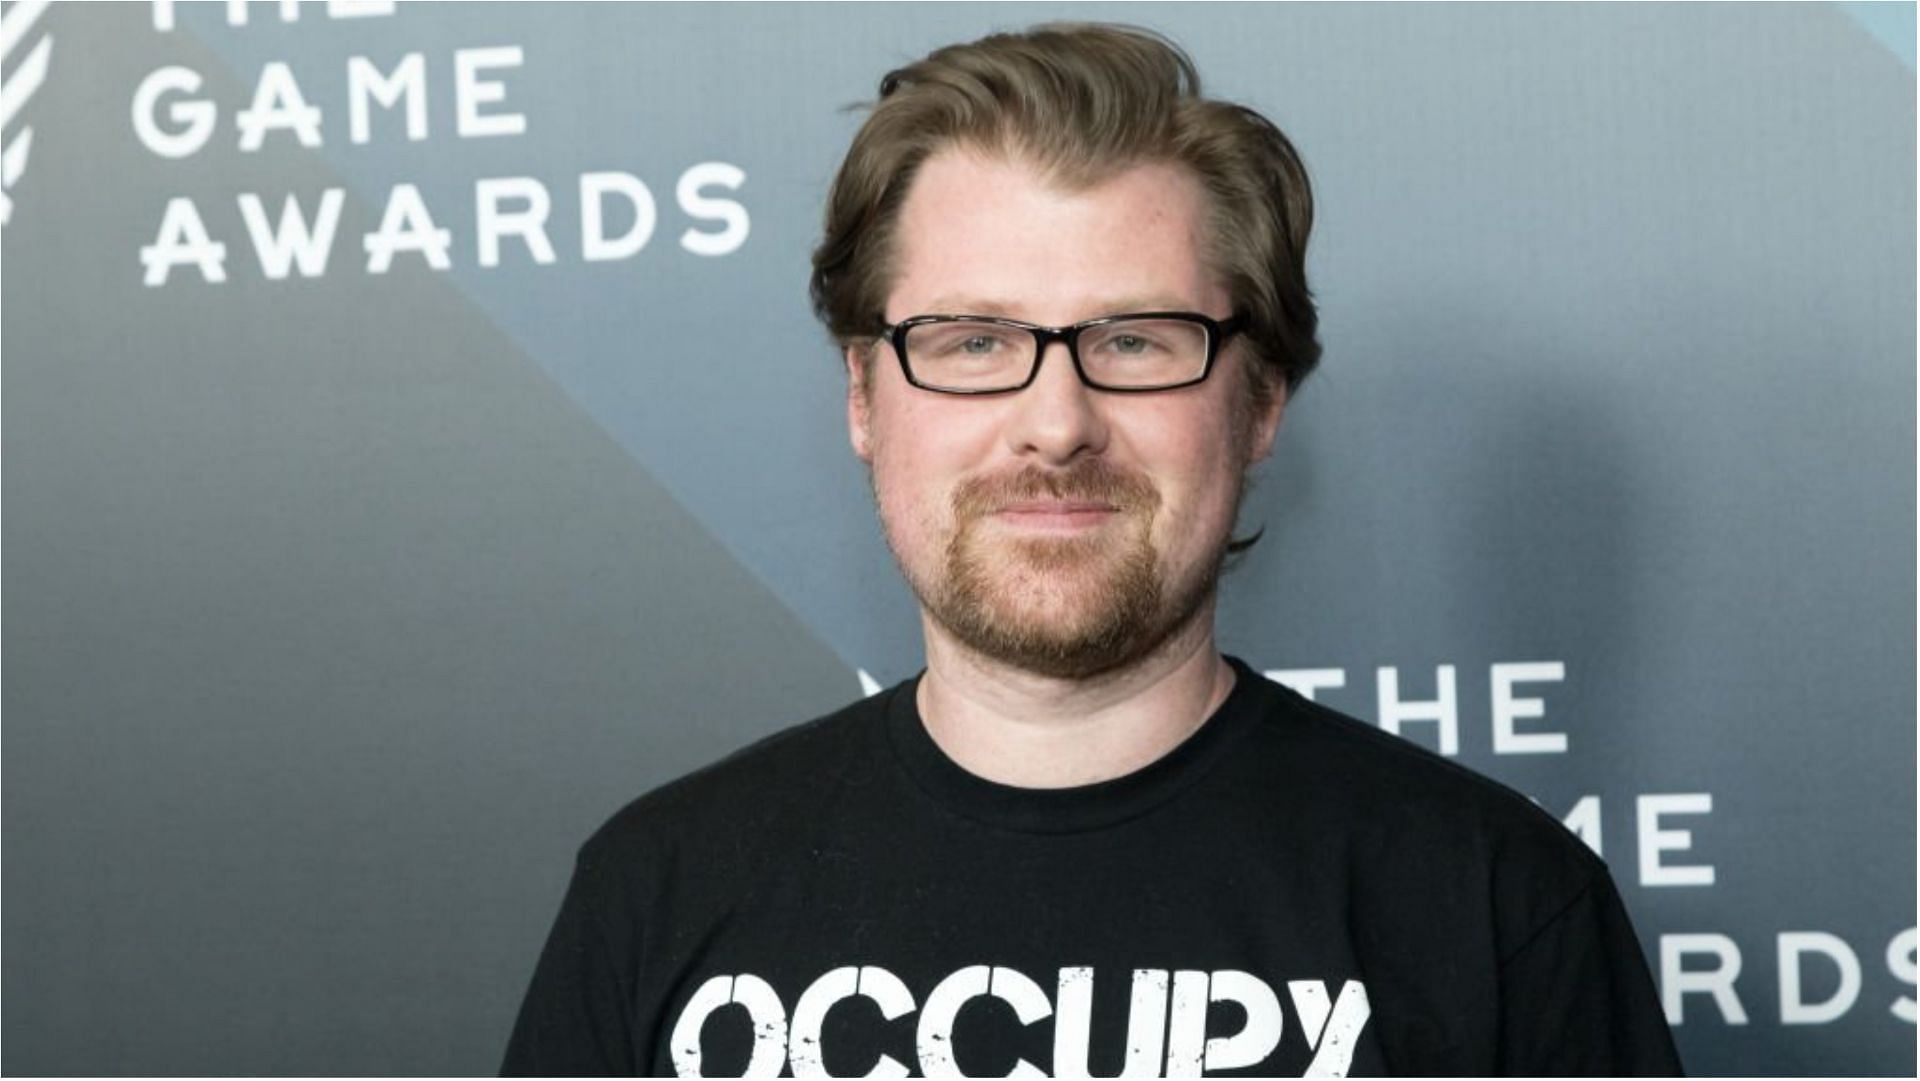 Justin Roiland has voiced different characters in films and TV shows (Image via Greg Doherty/Getty Images)